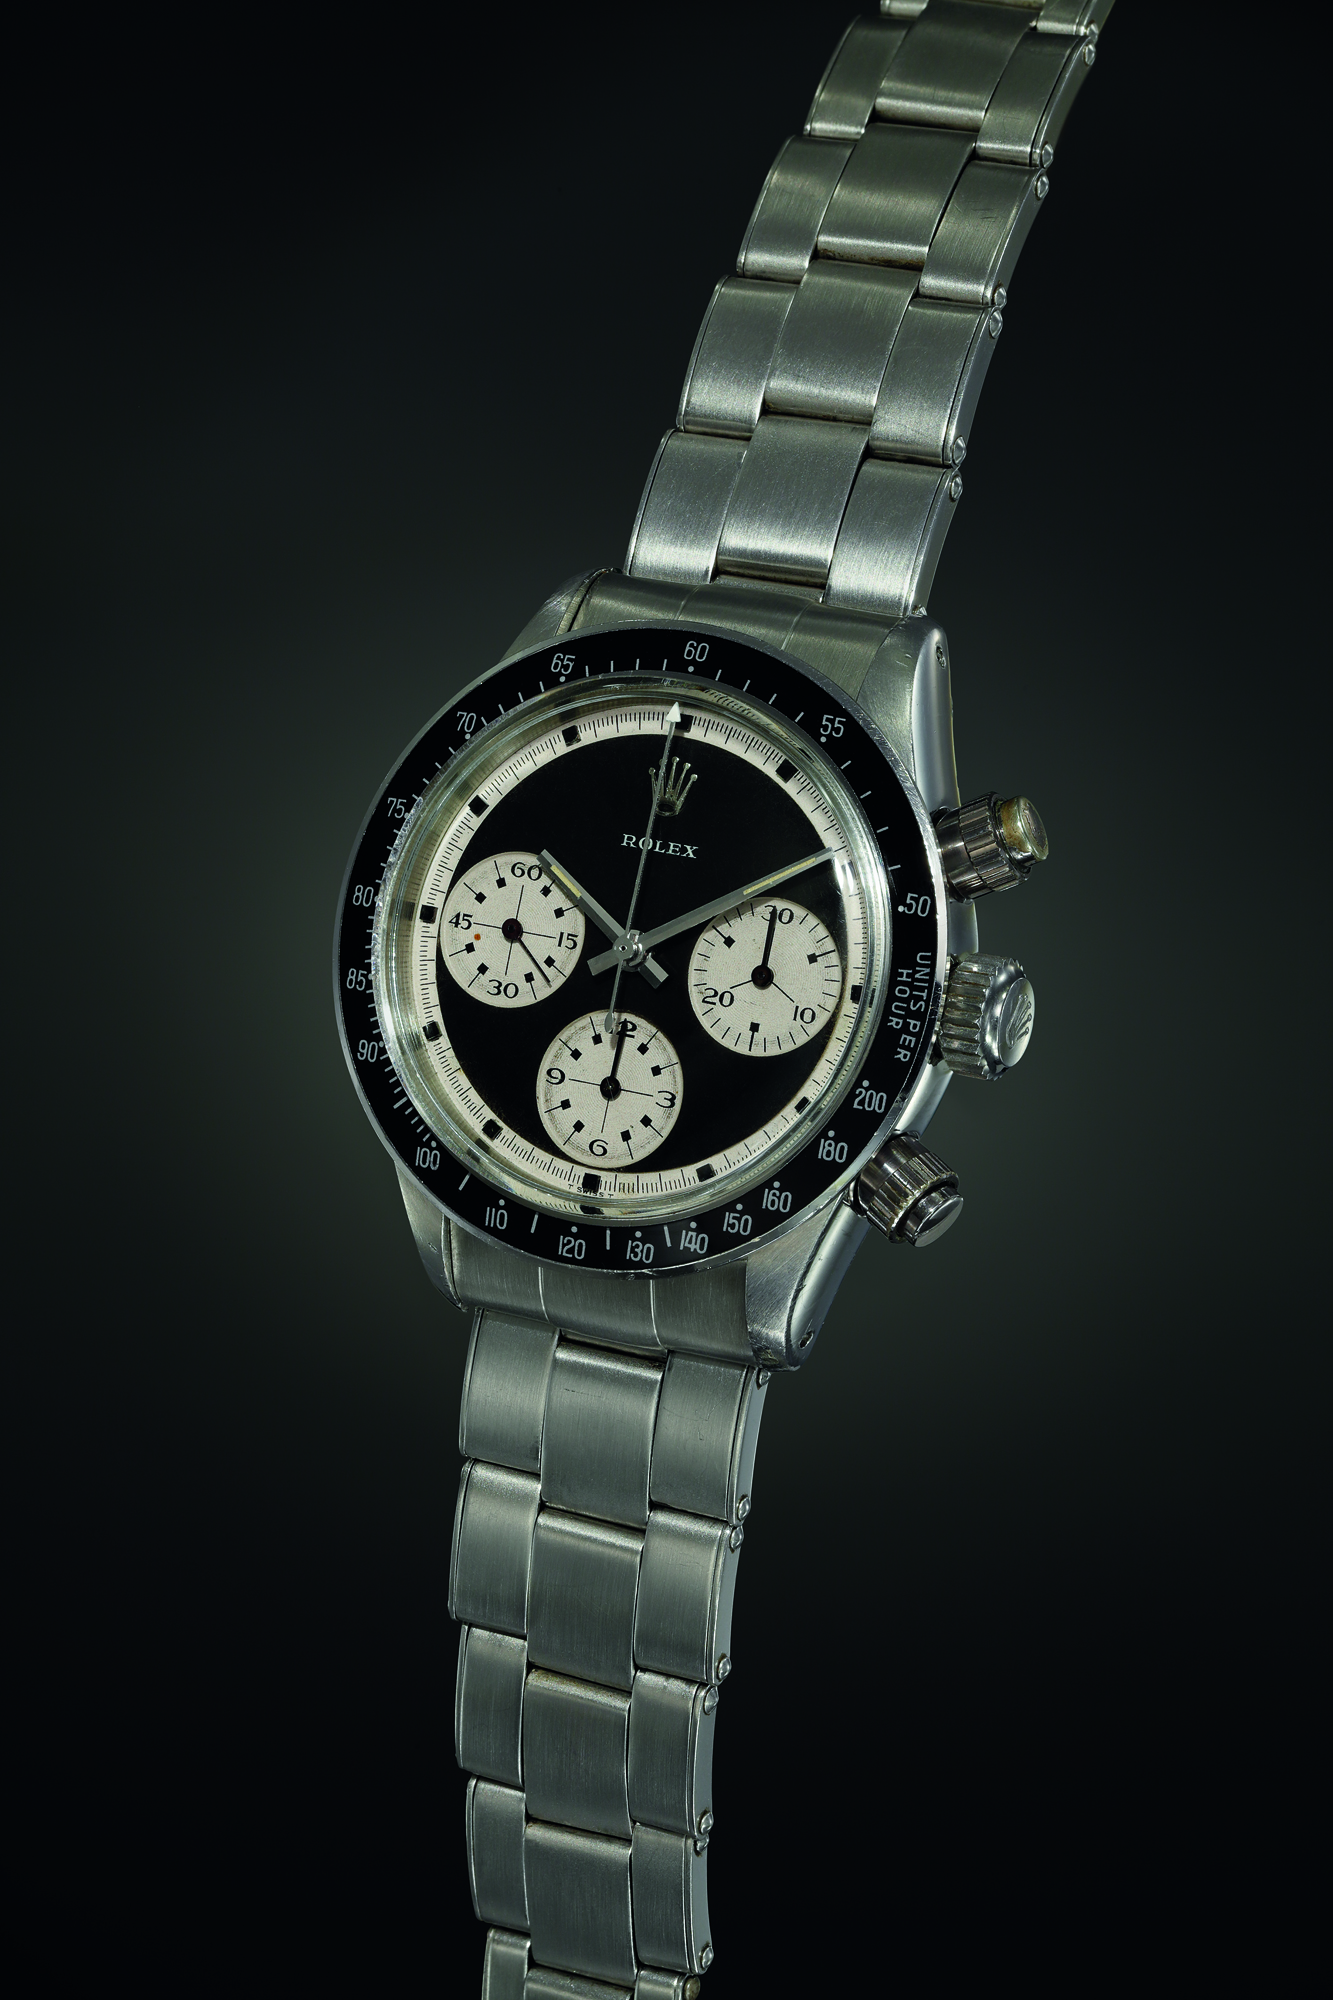 A highly interesting and historically important stainless steel chronograph wristwatch with most probably unique black and white ‘pre-Paul Newman’ style dial, featuring oversized registers and black outer seconds marks on white track. Realised CHF 3,012,500.